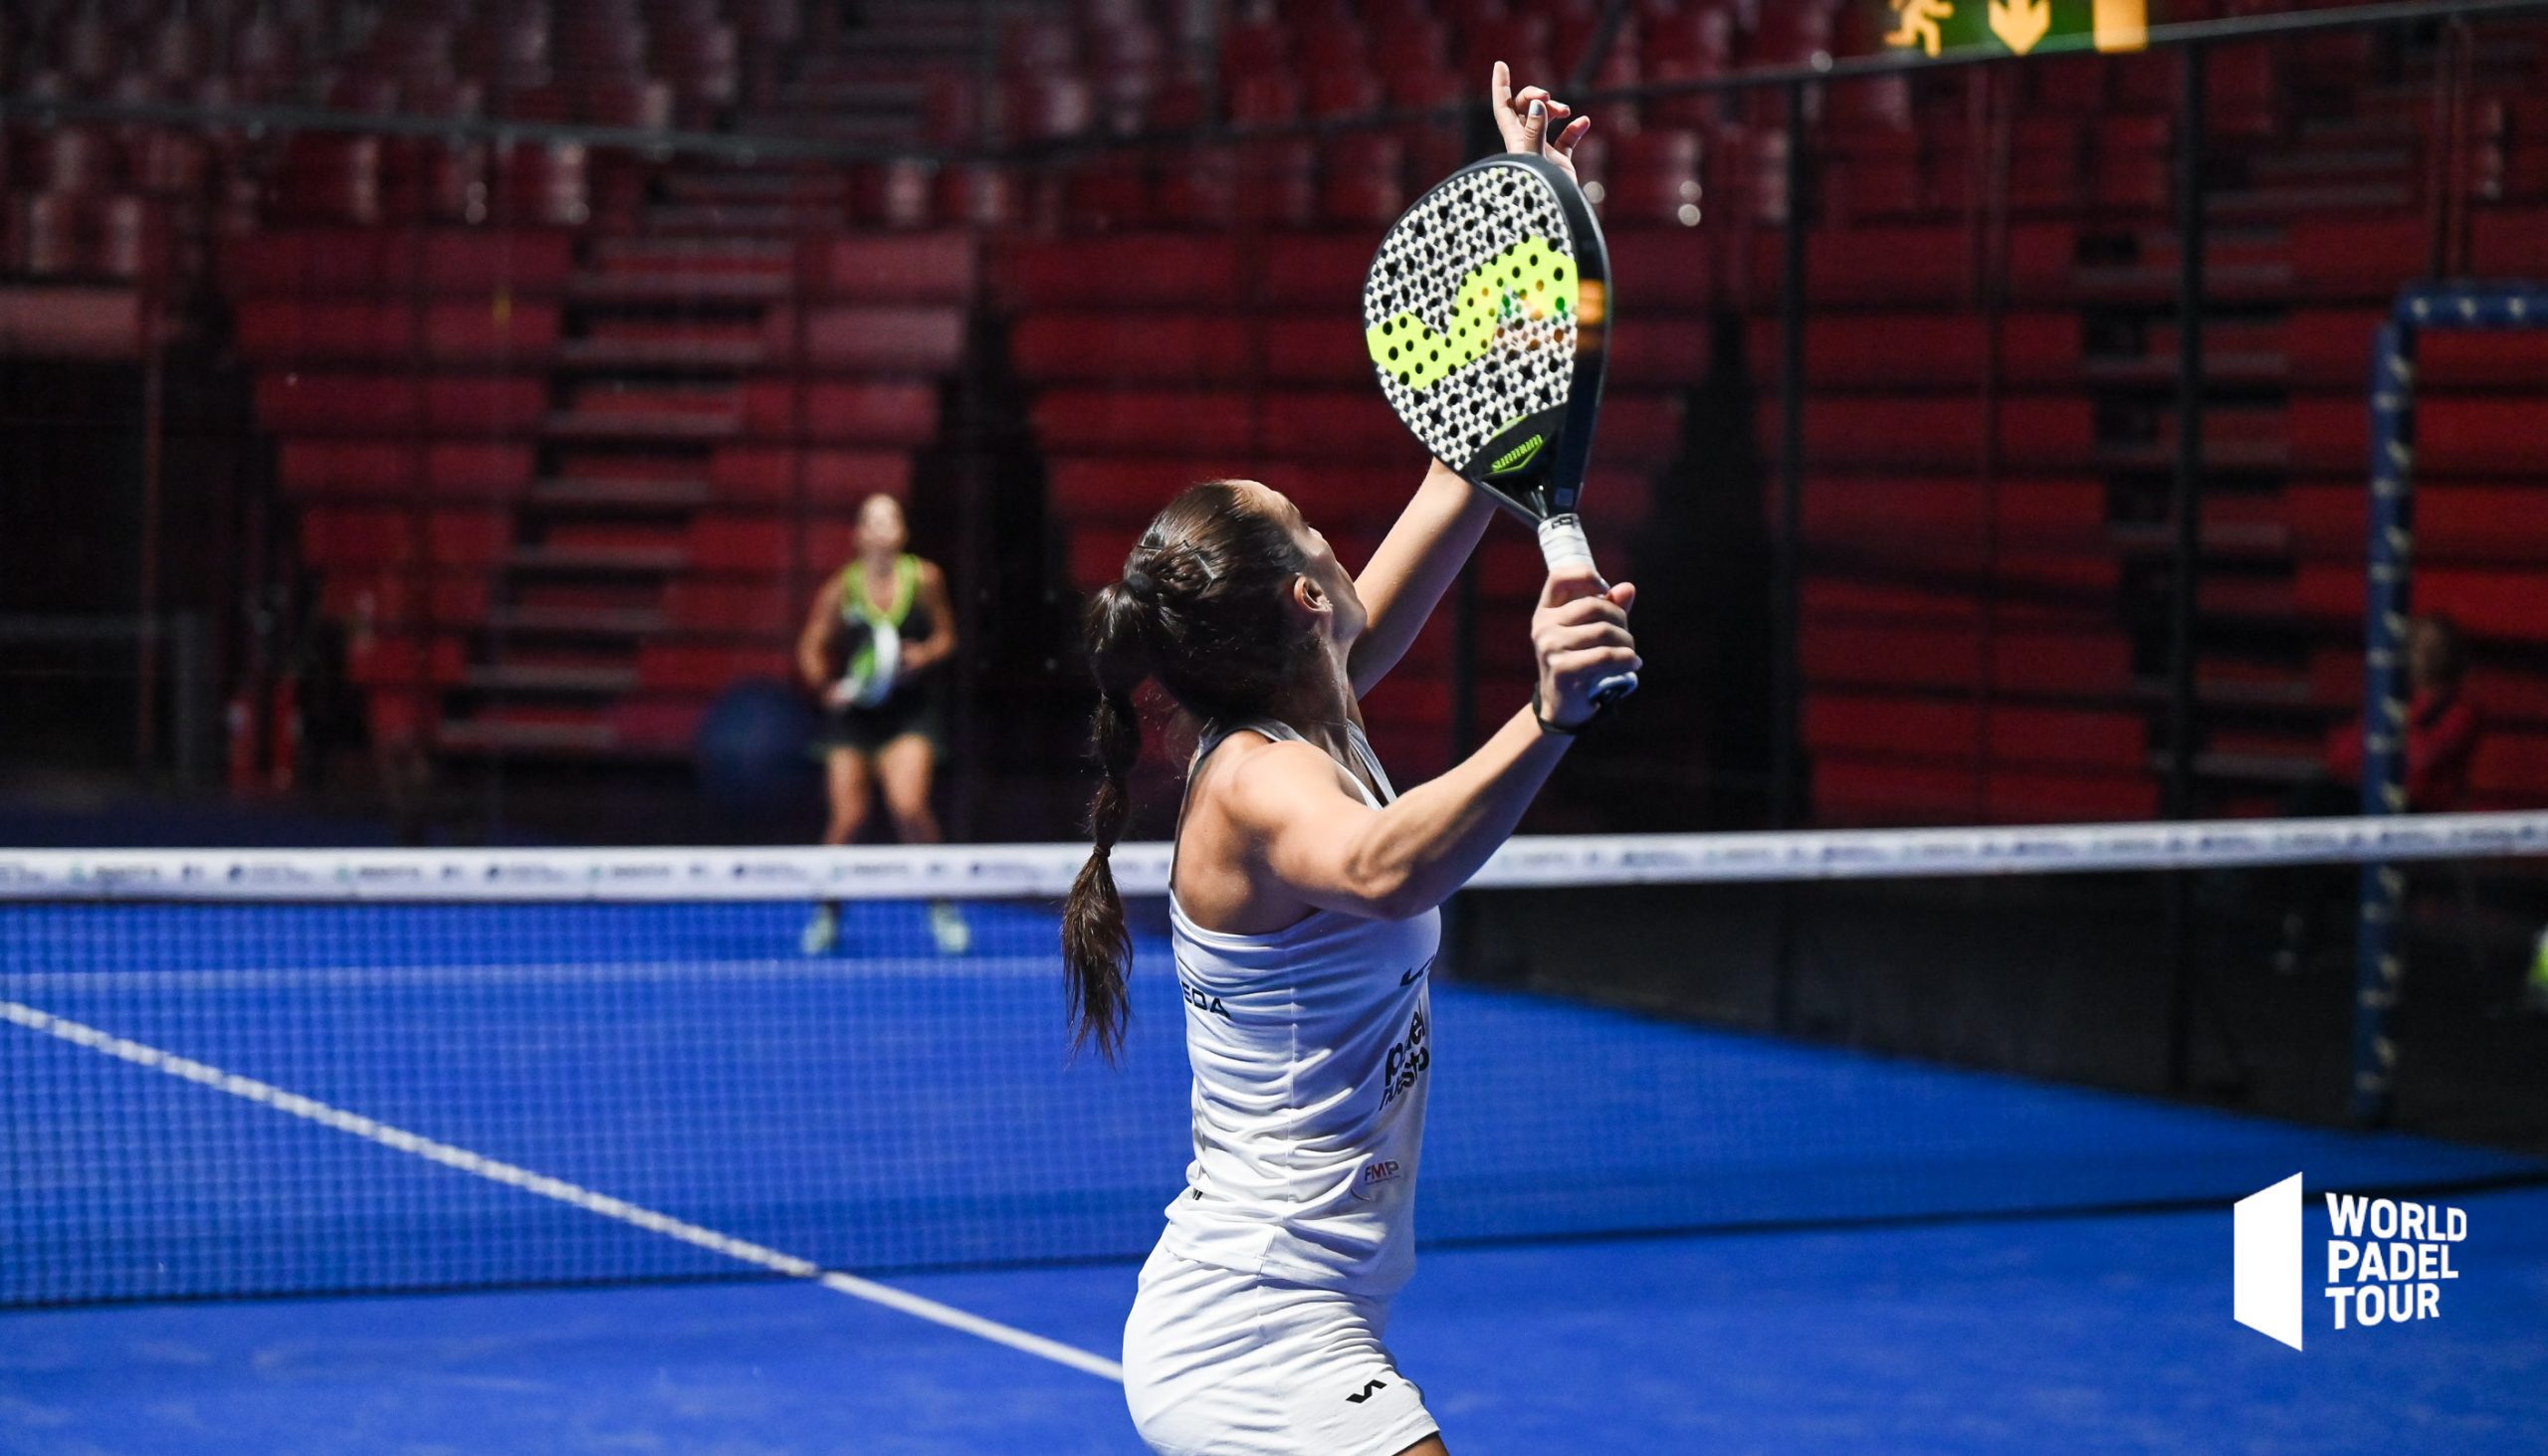 Three top eight pairs sent home in enthralling Swedish Padel Open 2022